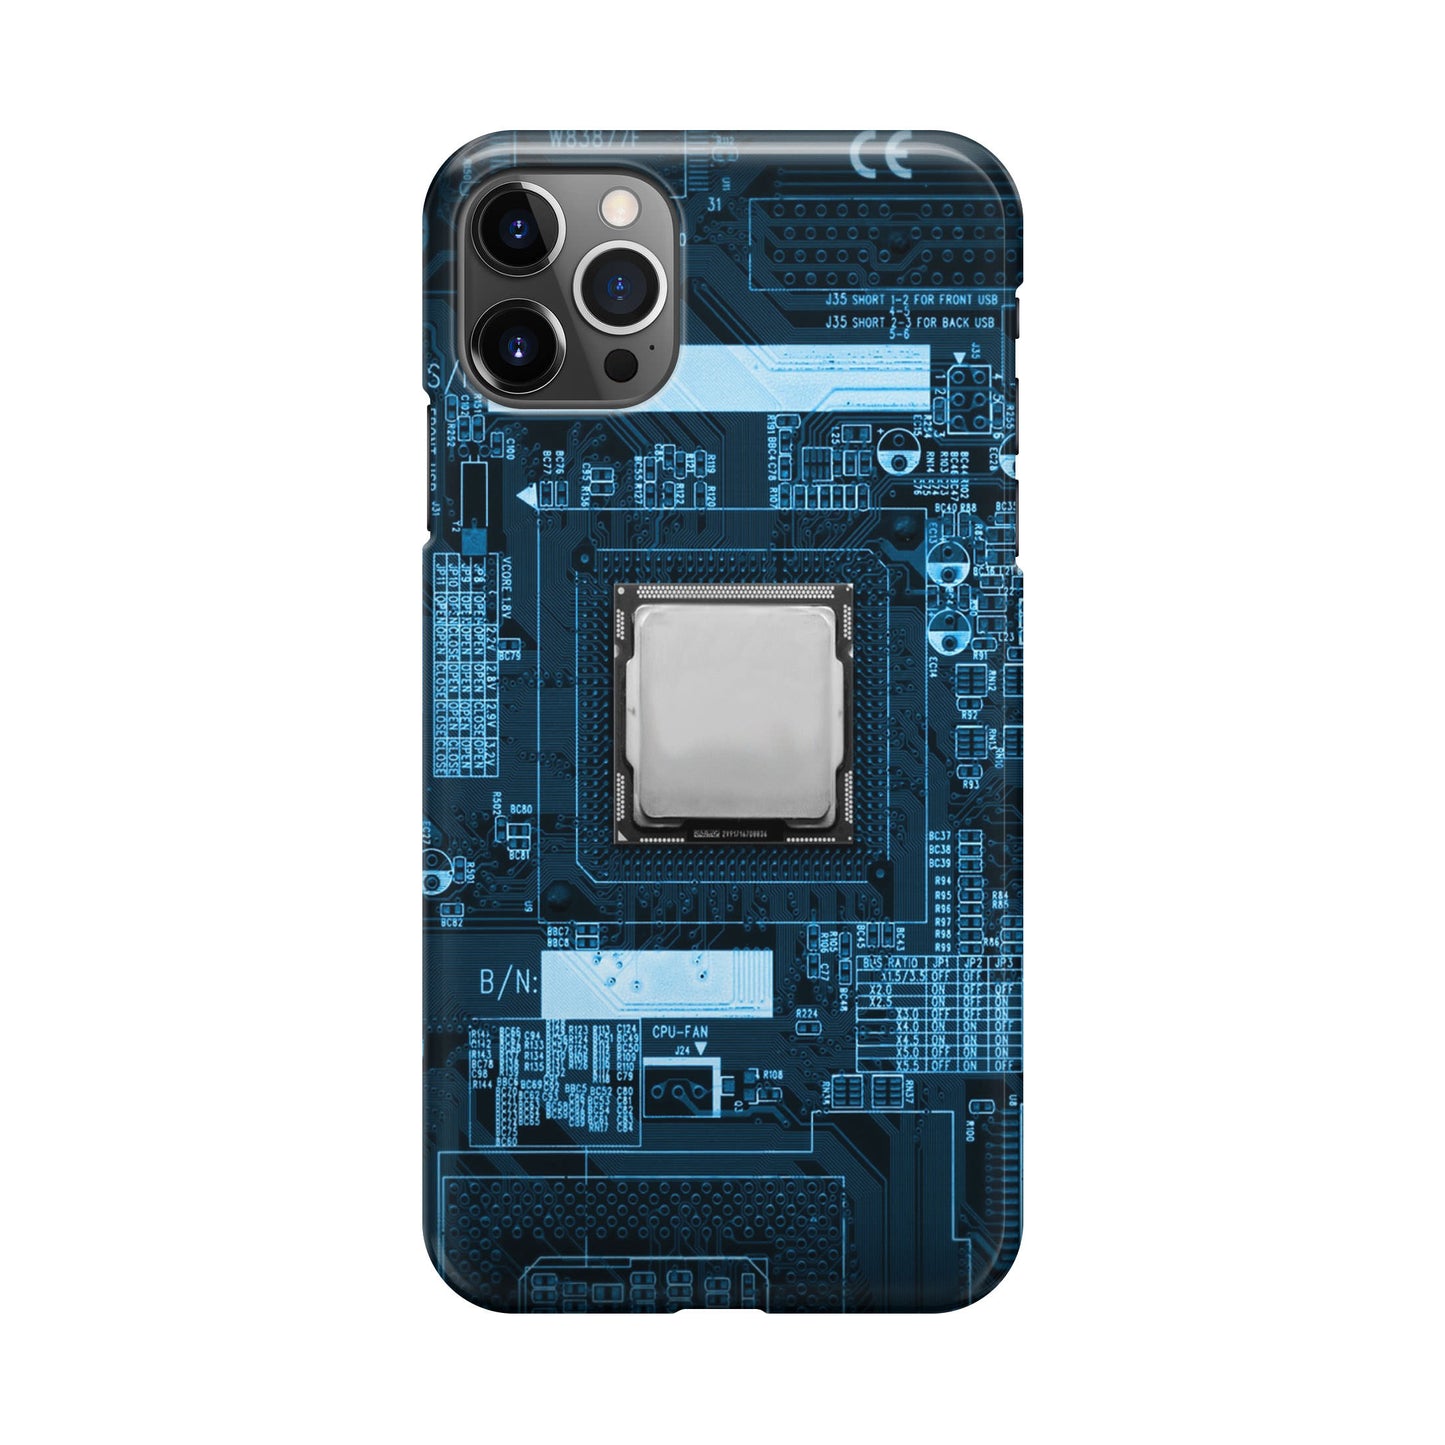 Mainboard Component iPhone 12 Pro Case